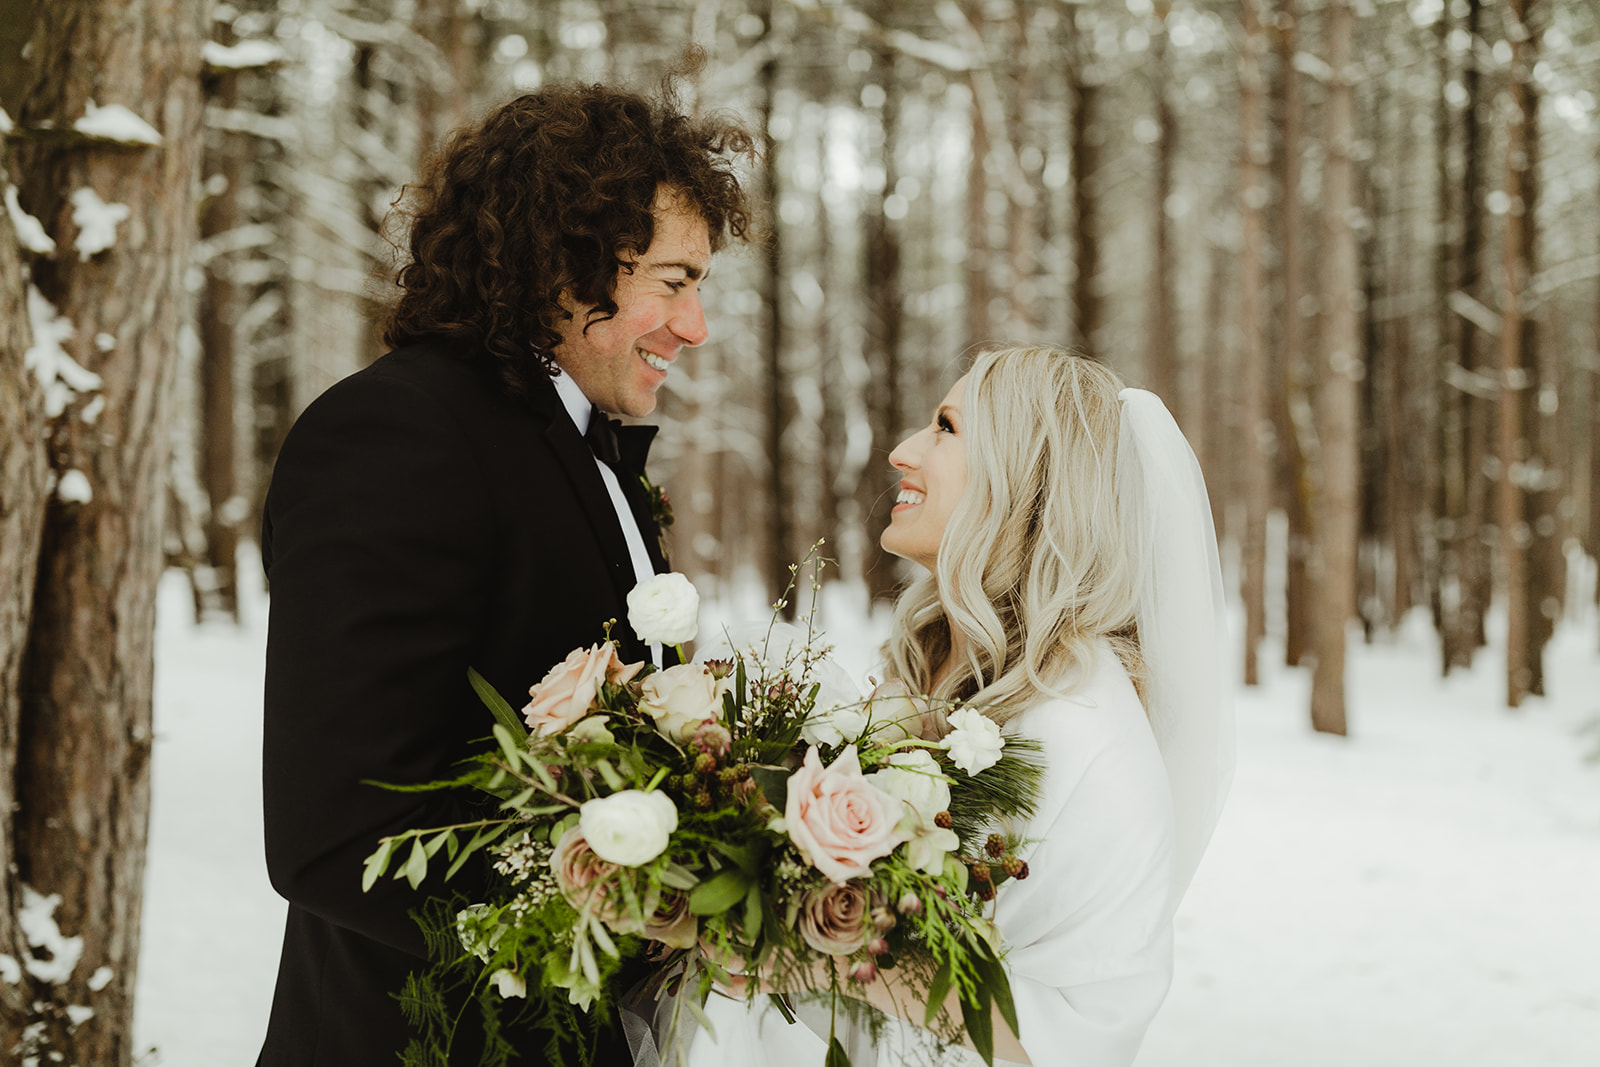 A bride and groom smiling in the snow after their Grand Rapids, Michigan wedding